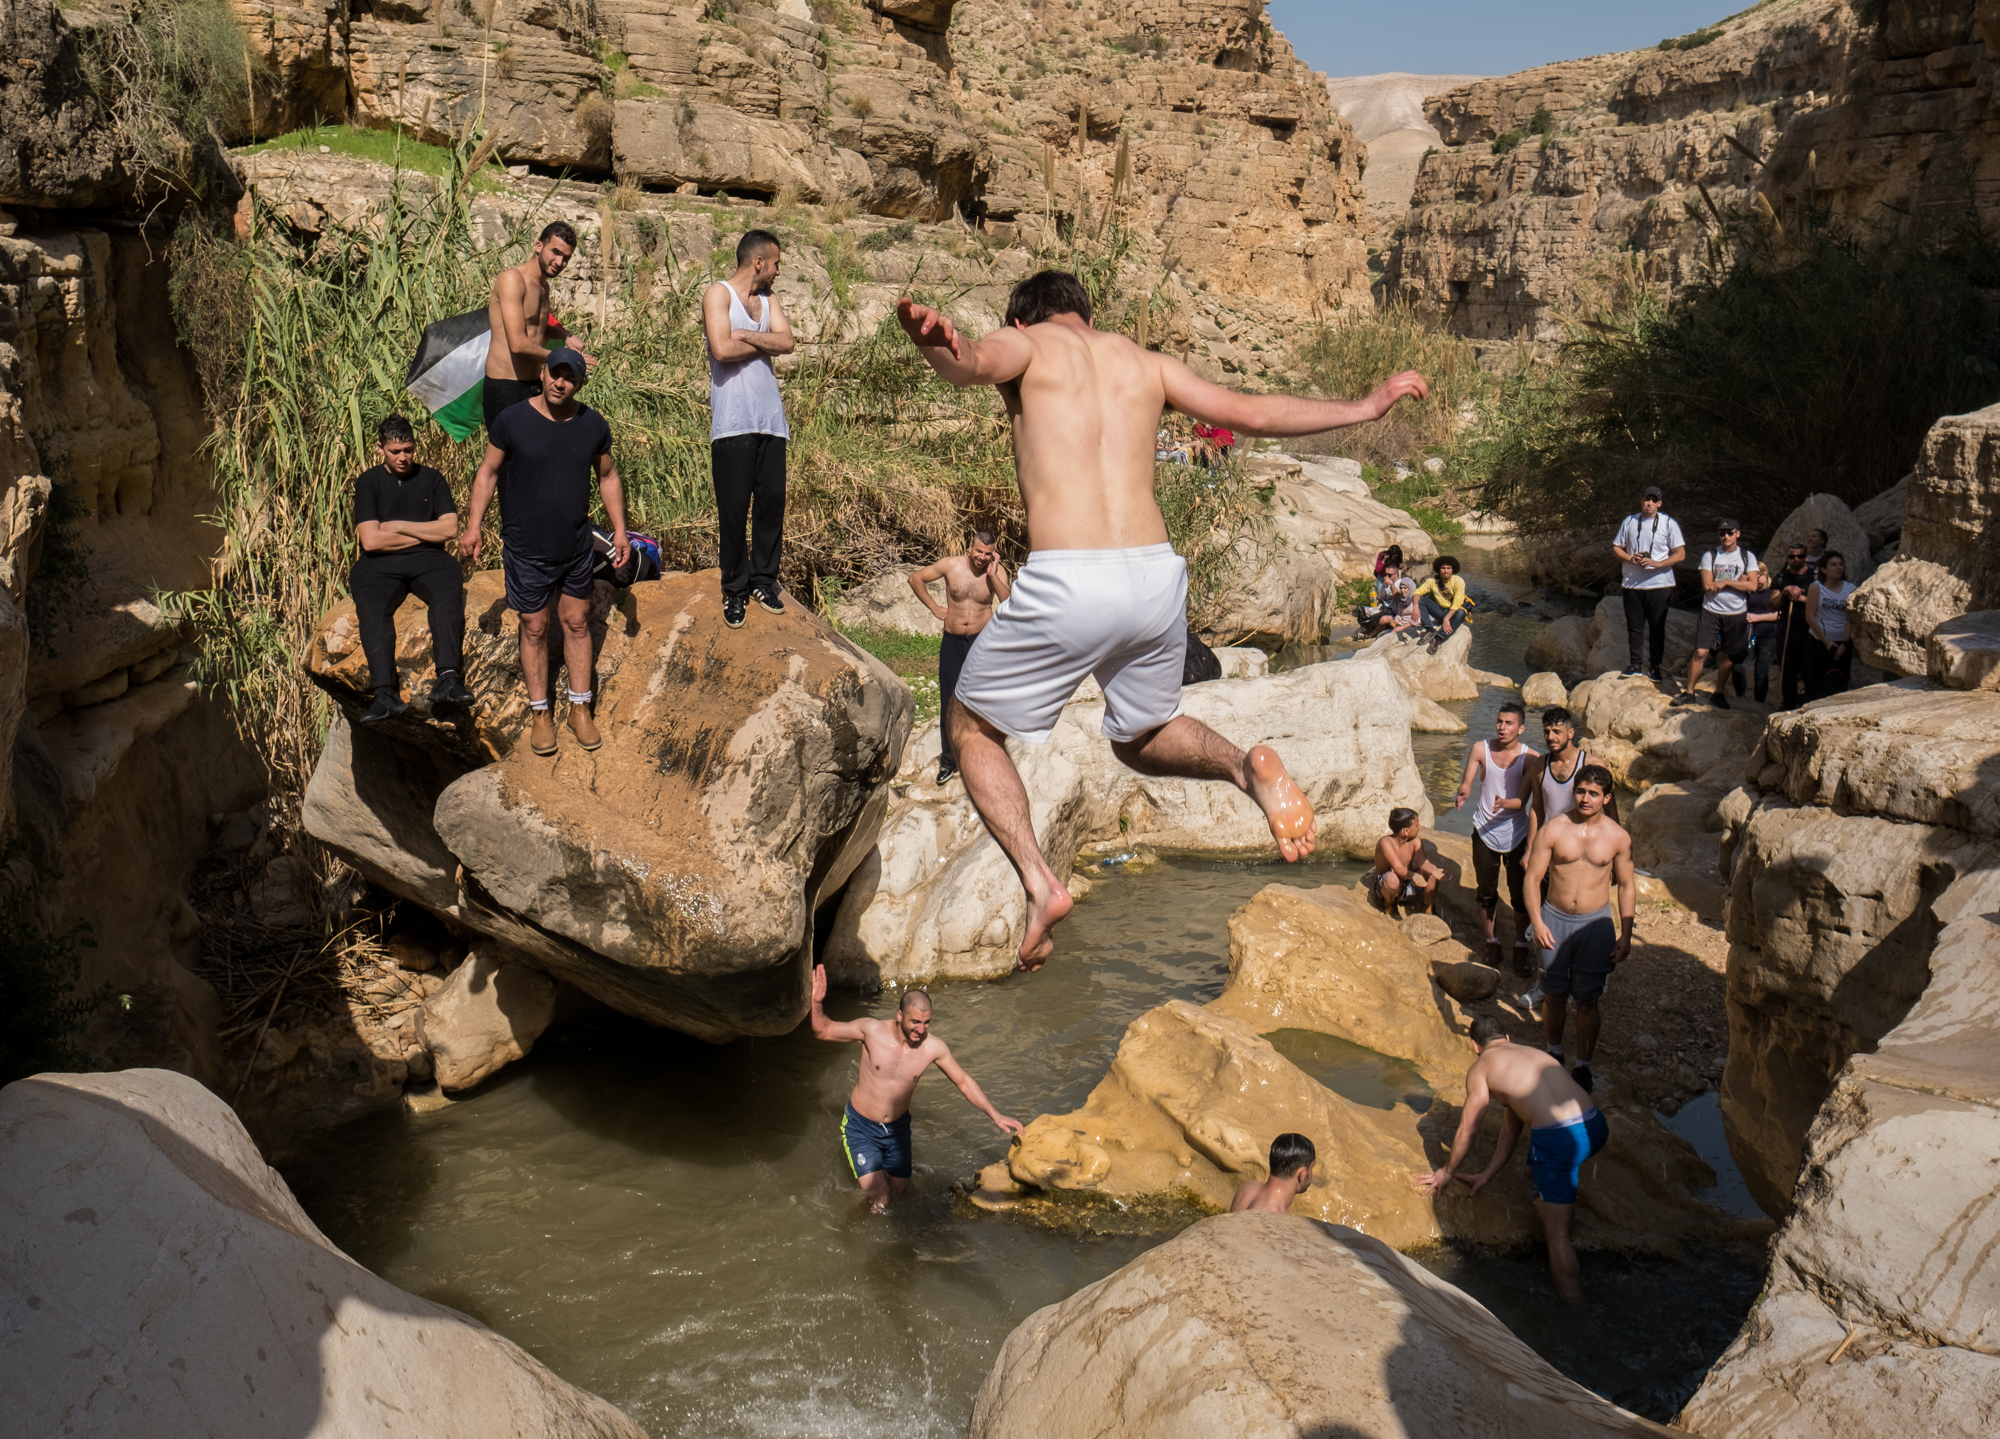 Palestinians stop to swim and play while hiking through a valley in the West Bank.